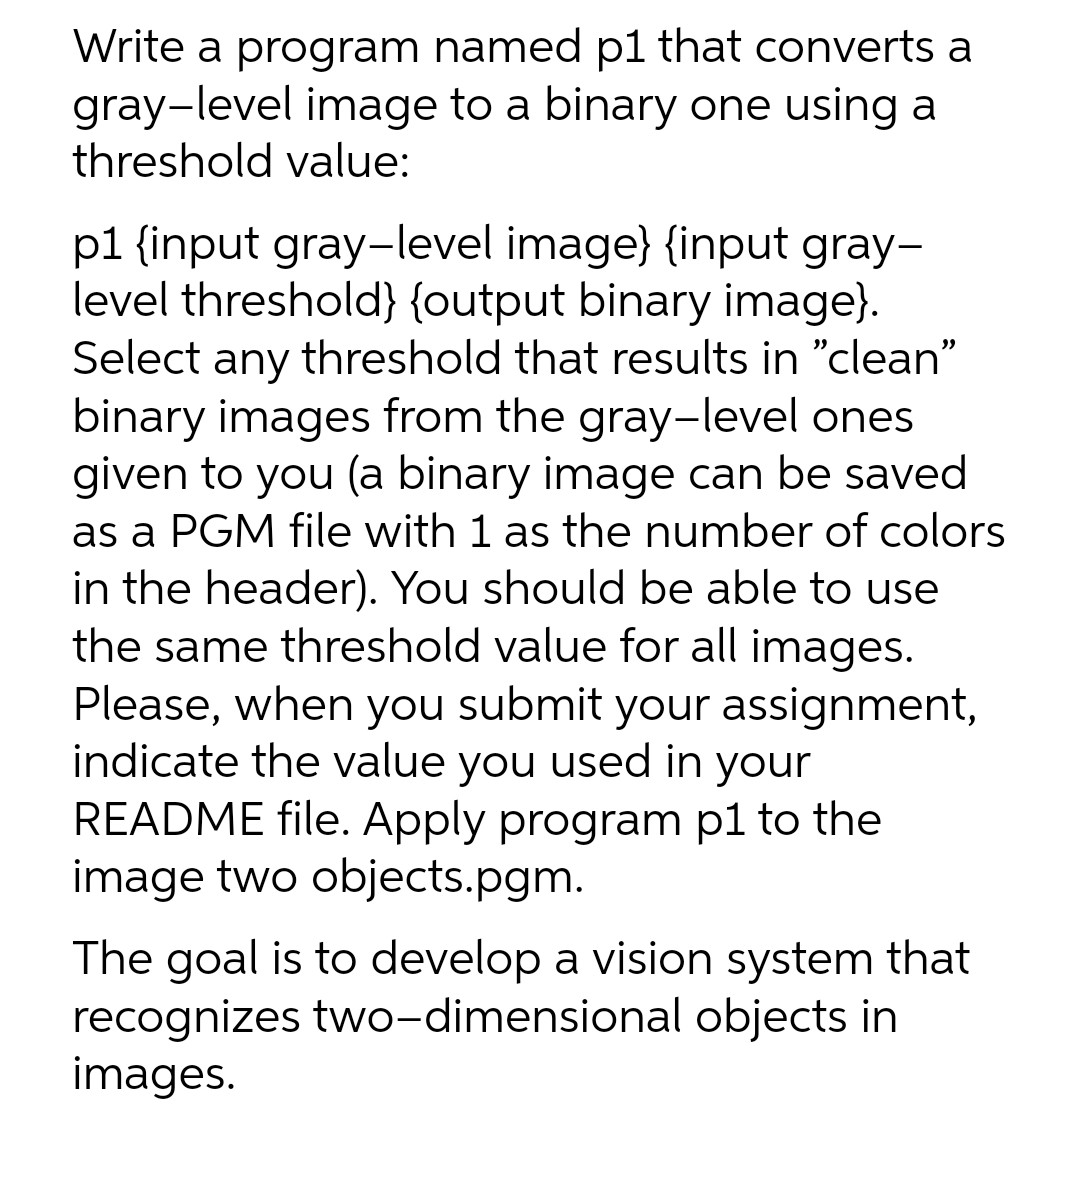 Write a program named p1 that converts a
gray-level image to a binary one using a
threshold value:
p1 {input gray-level image} {input gray-
level threshold} {output binary image}.
Select any threshold that results in "clean"
binary images from the gray-level ones
given to you (a binary image can be saved
as a PGM file with 1 as the number of colors
in the header). You should be able to use
the same threshold value for all images.
Please, when you submit your assignment,
indicate the value you used in your
README file. Apply program p1 to the
image two objects.pgm.
The goal is to develop a vision system that
recognizes two-dimensional objects in
images.
